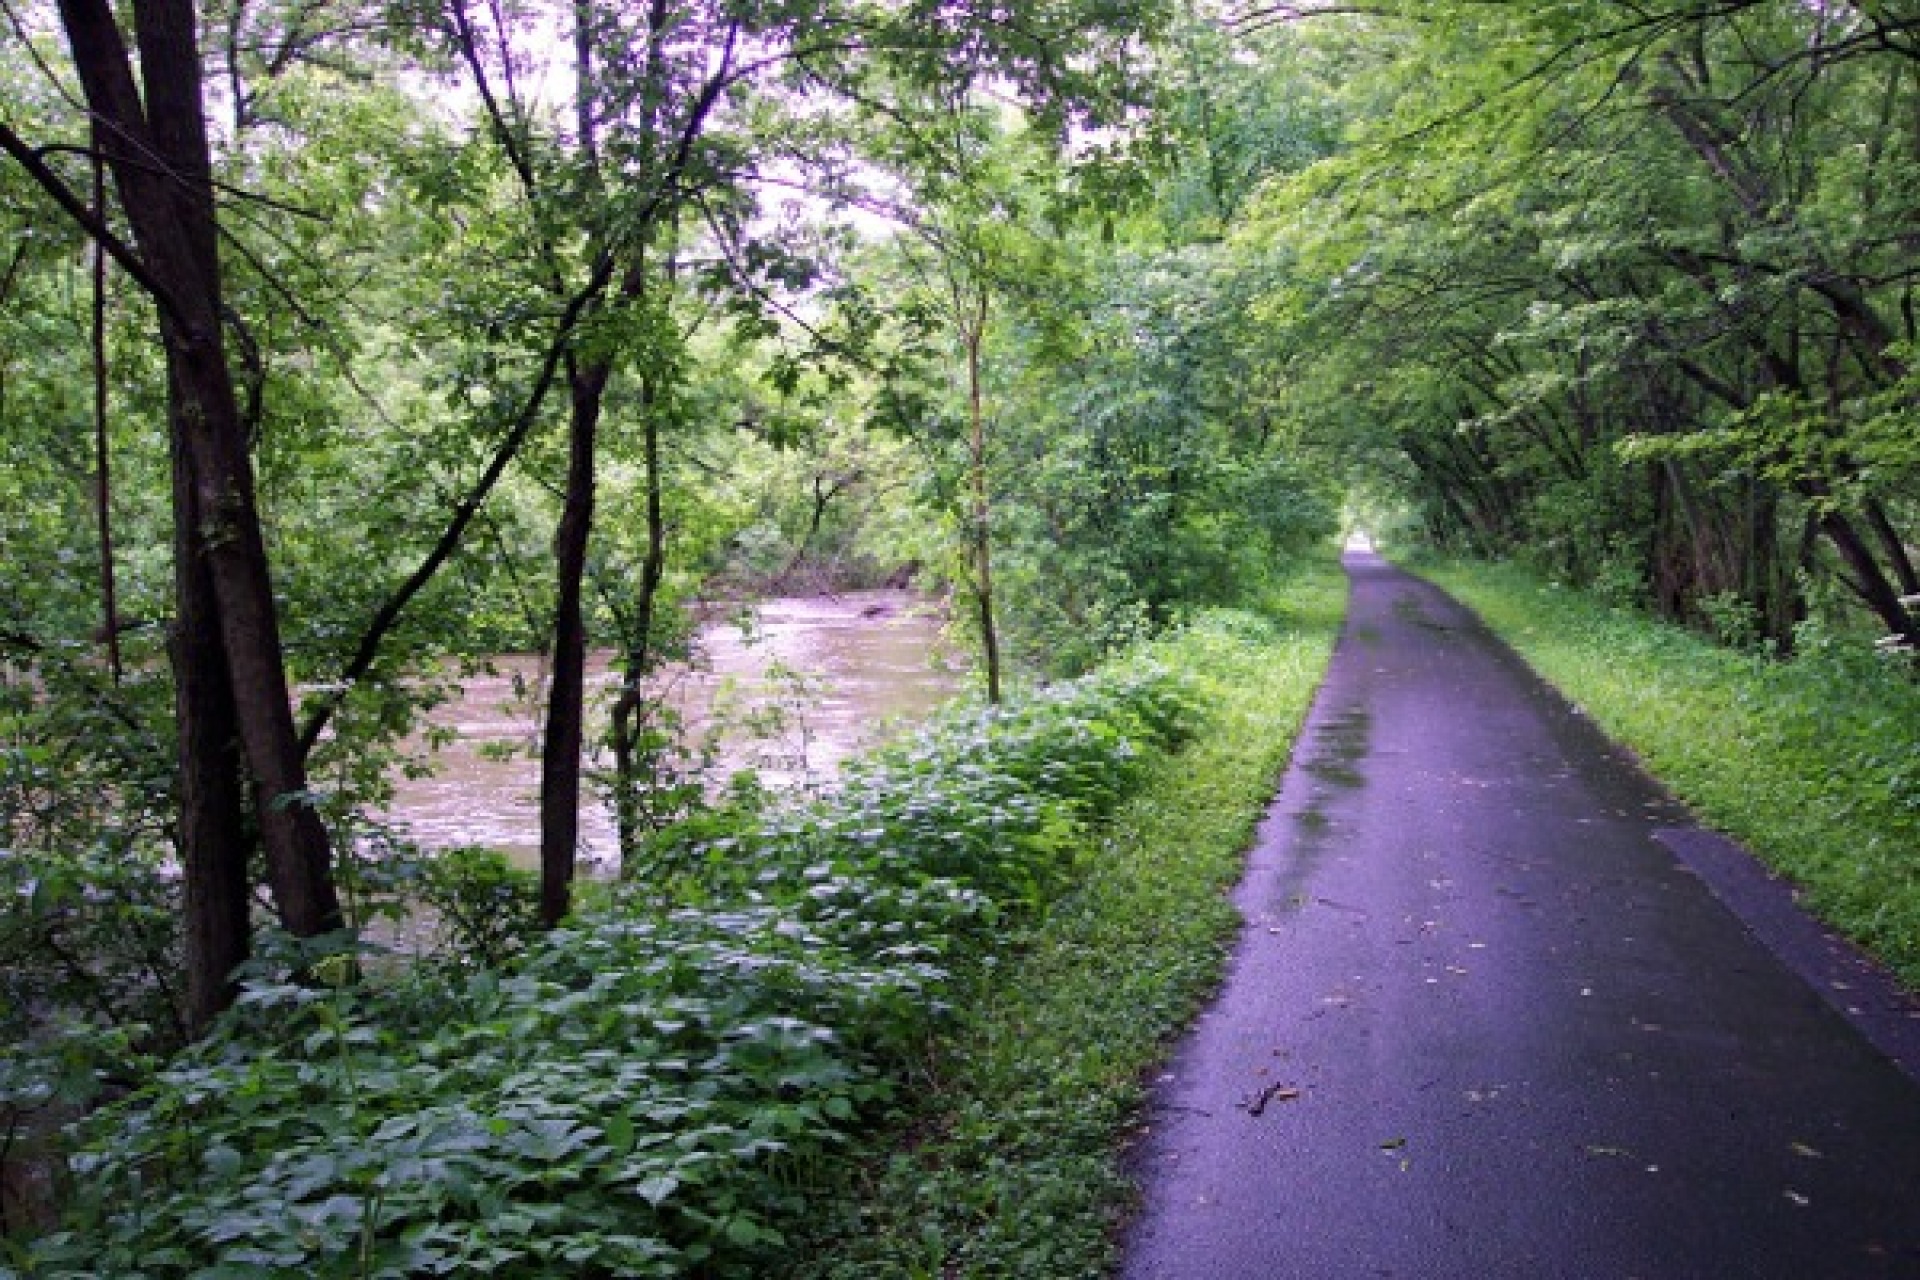 A part of the Cannon Valley Trail that includes a paved road through a green space.